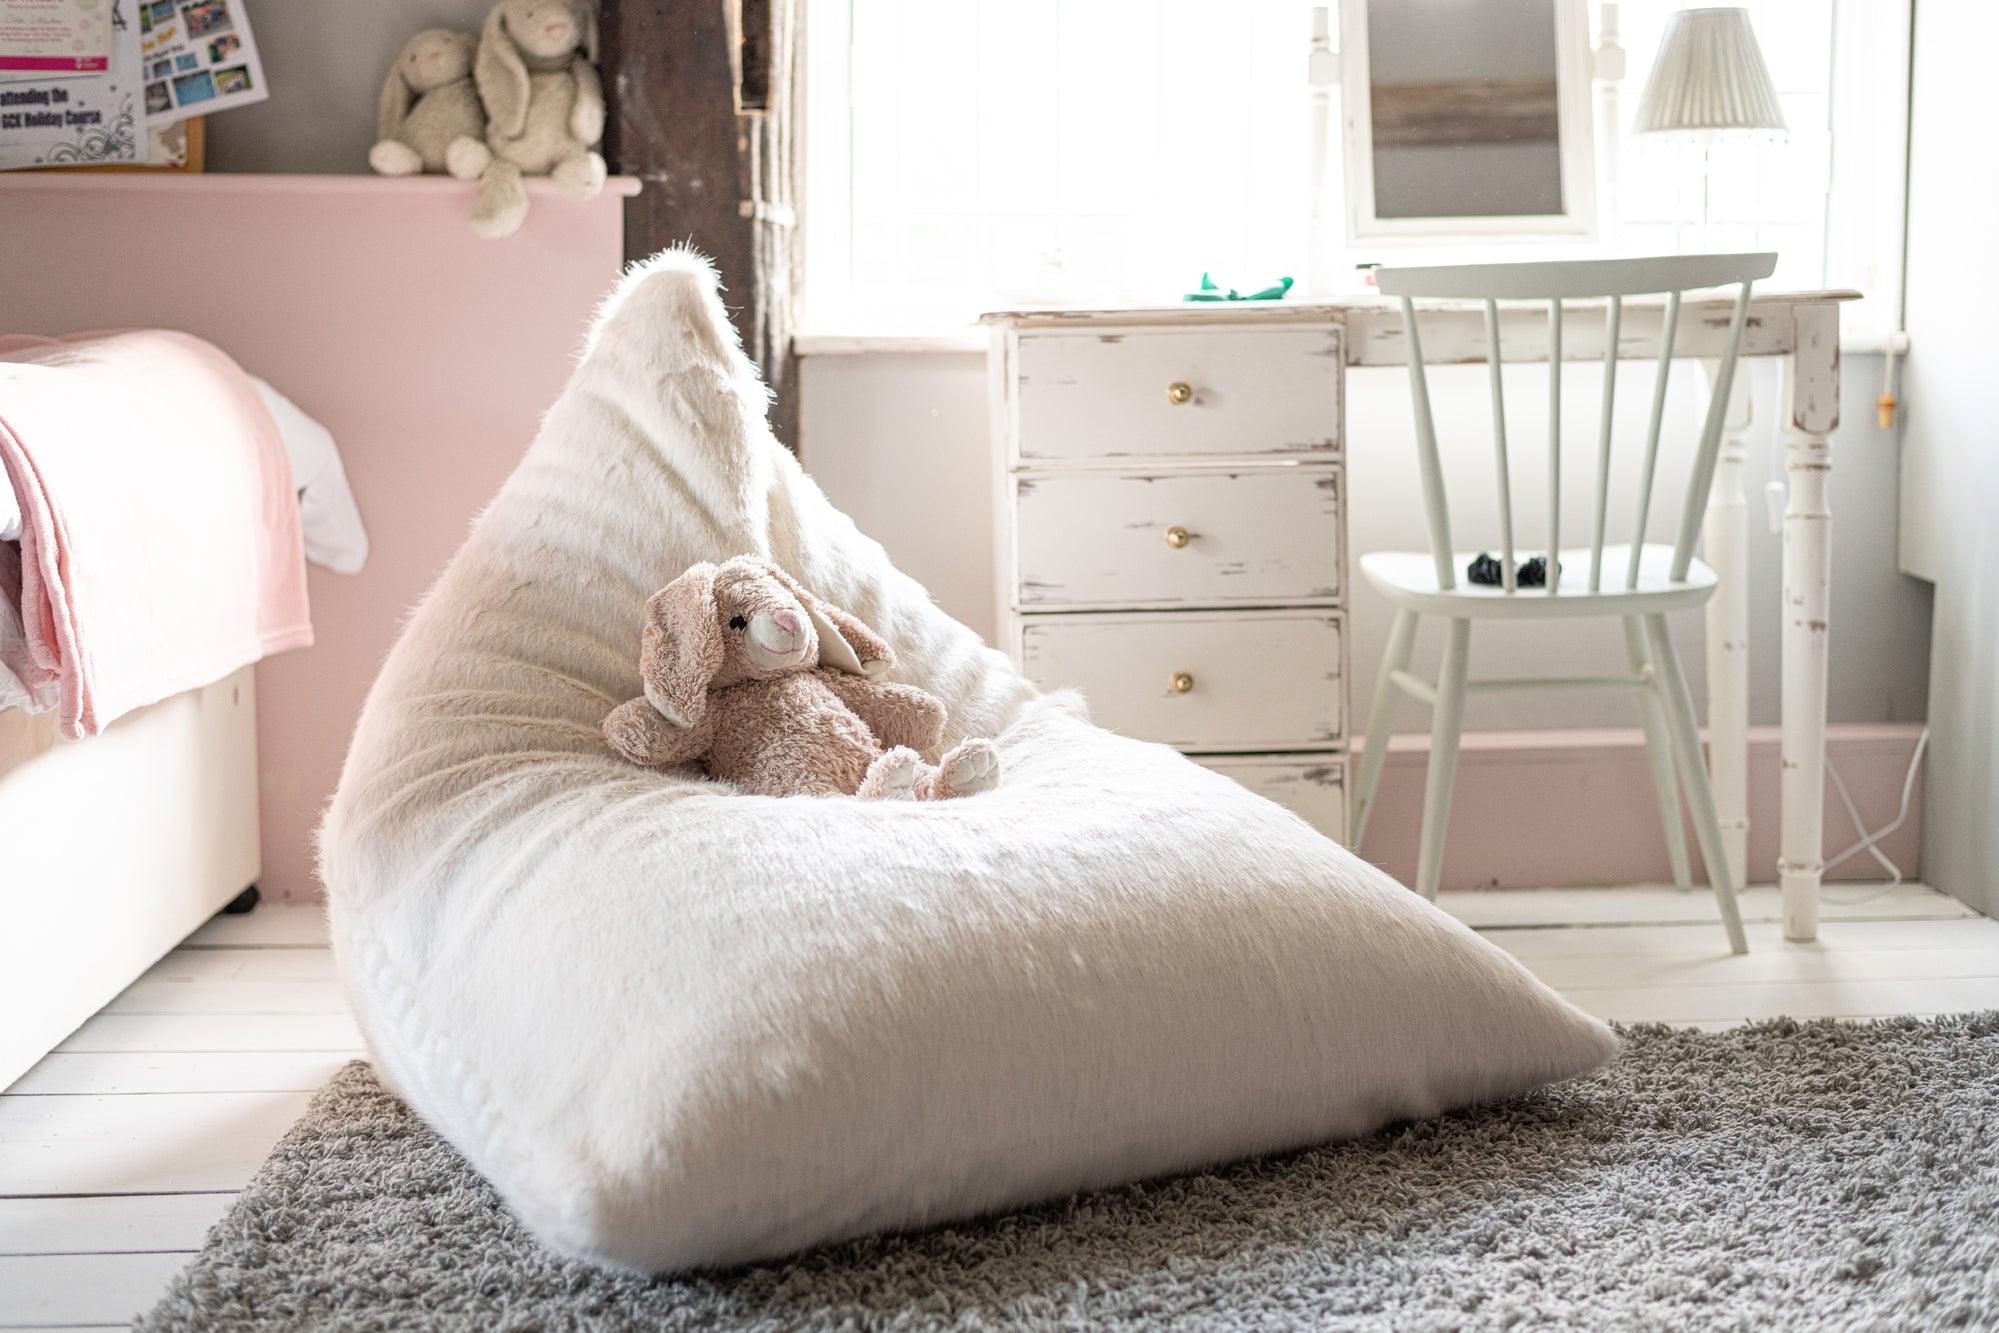 Get them something different this Christmas, a beautiful bean bag chair for kids - armadillosun